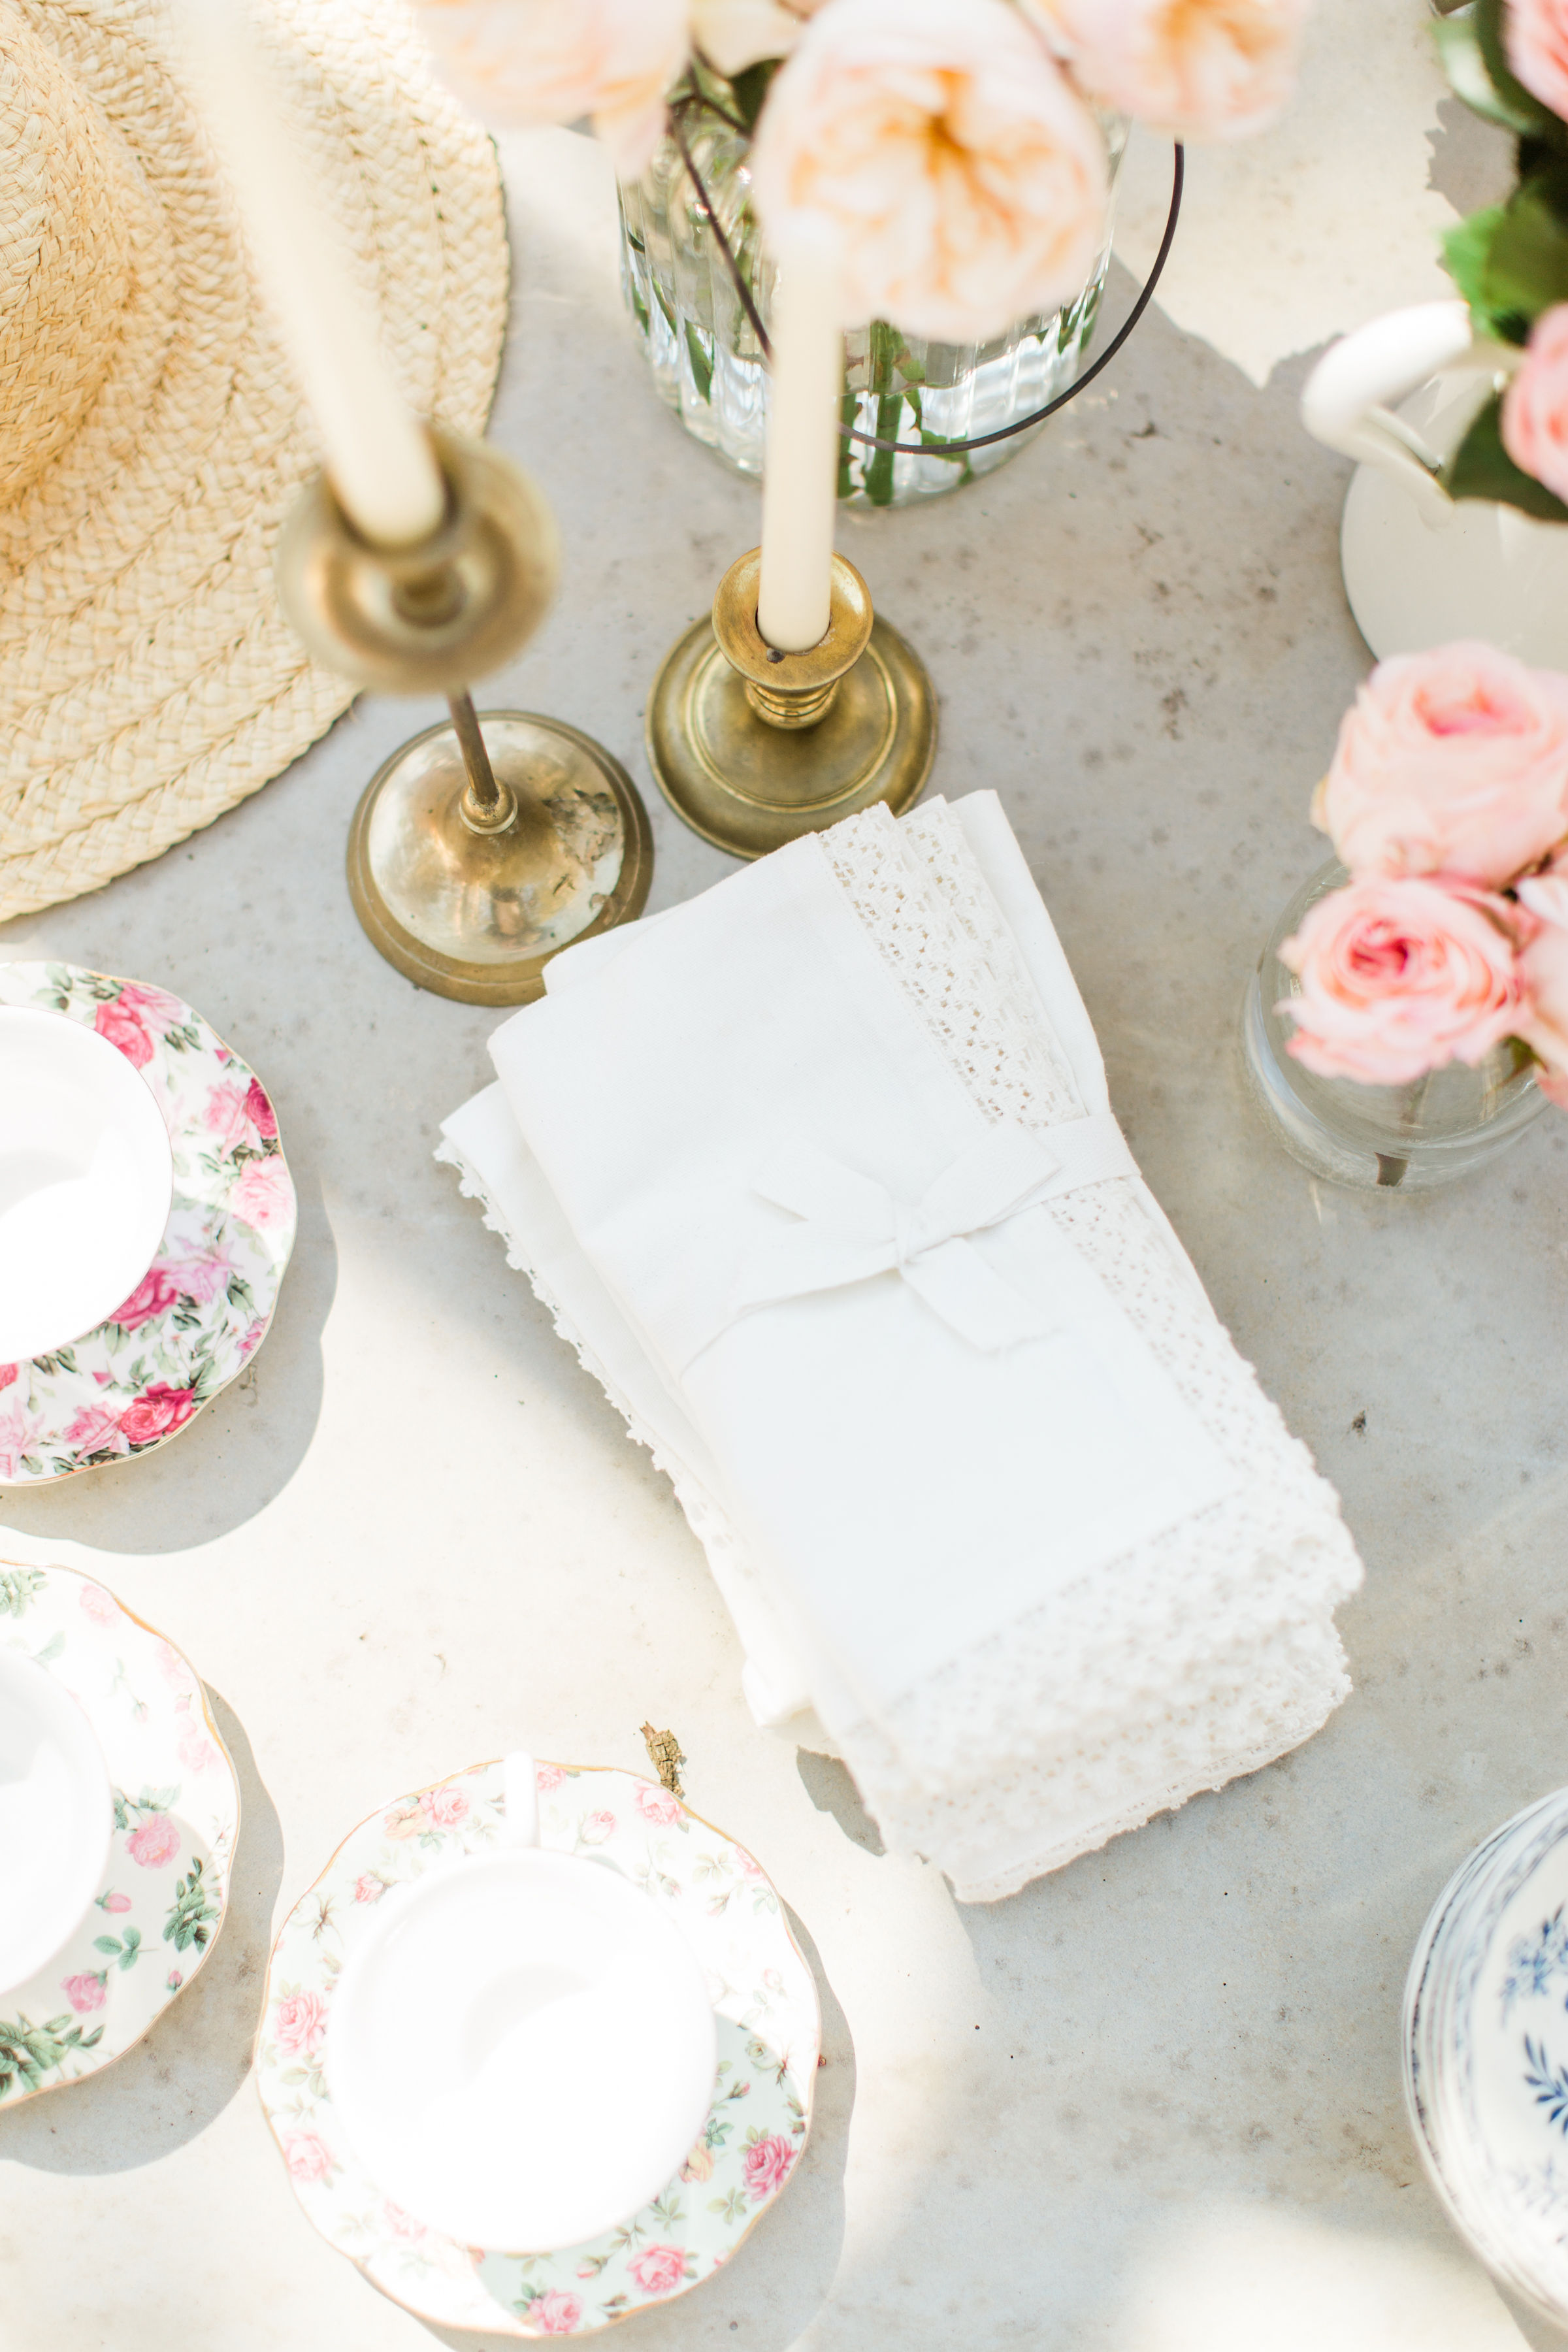 Welcome the sunshine with a whimsical outdoor spring tea and dessert party.